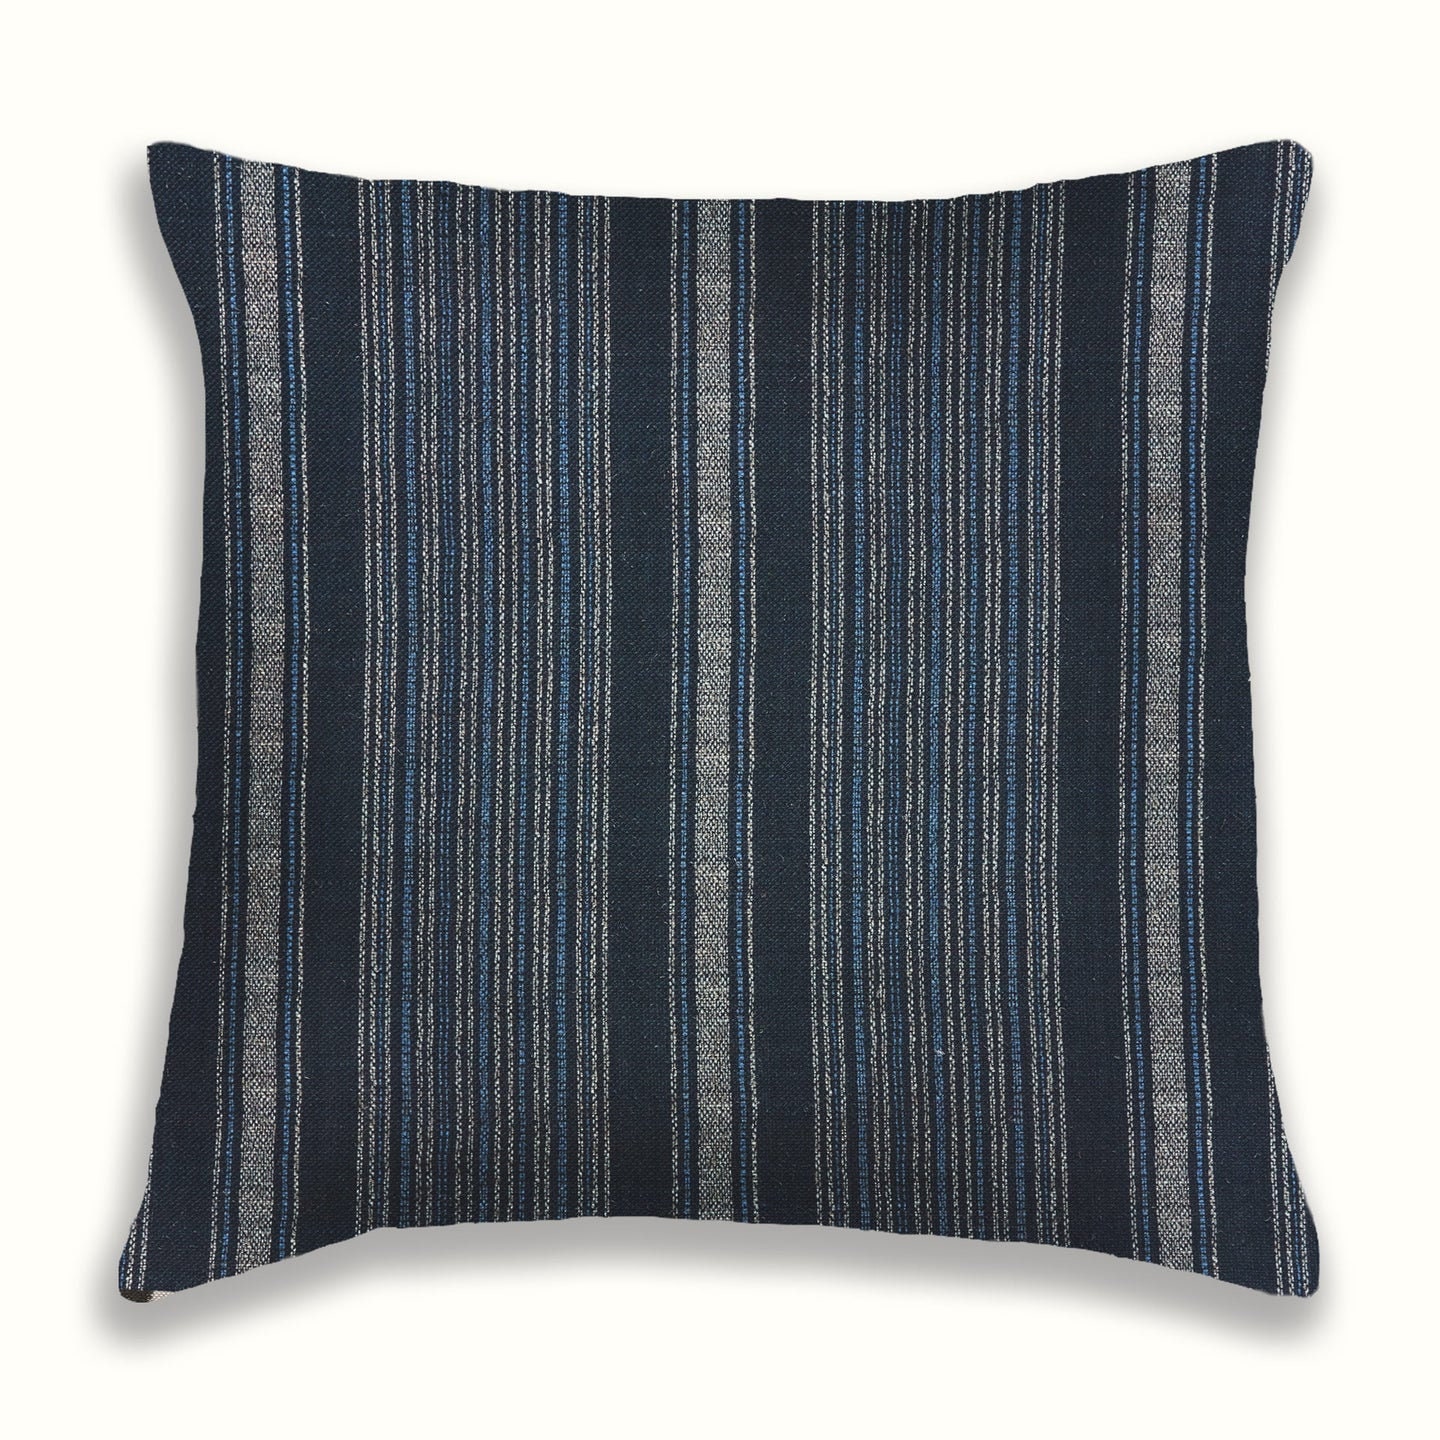 Home Soft Things Suede Pillow Shell with Big Zipper 2 Pieces - Baltic Blue - 20 inch x 20 inch, Size: 20 x 20